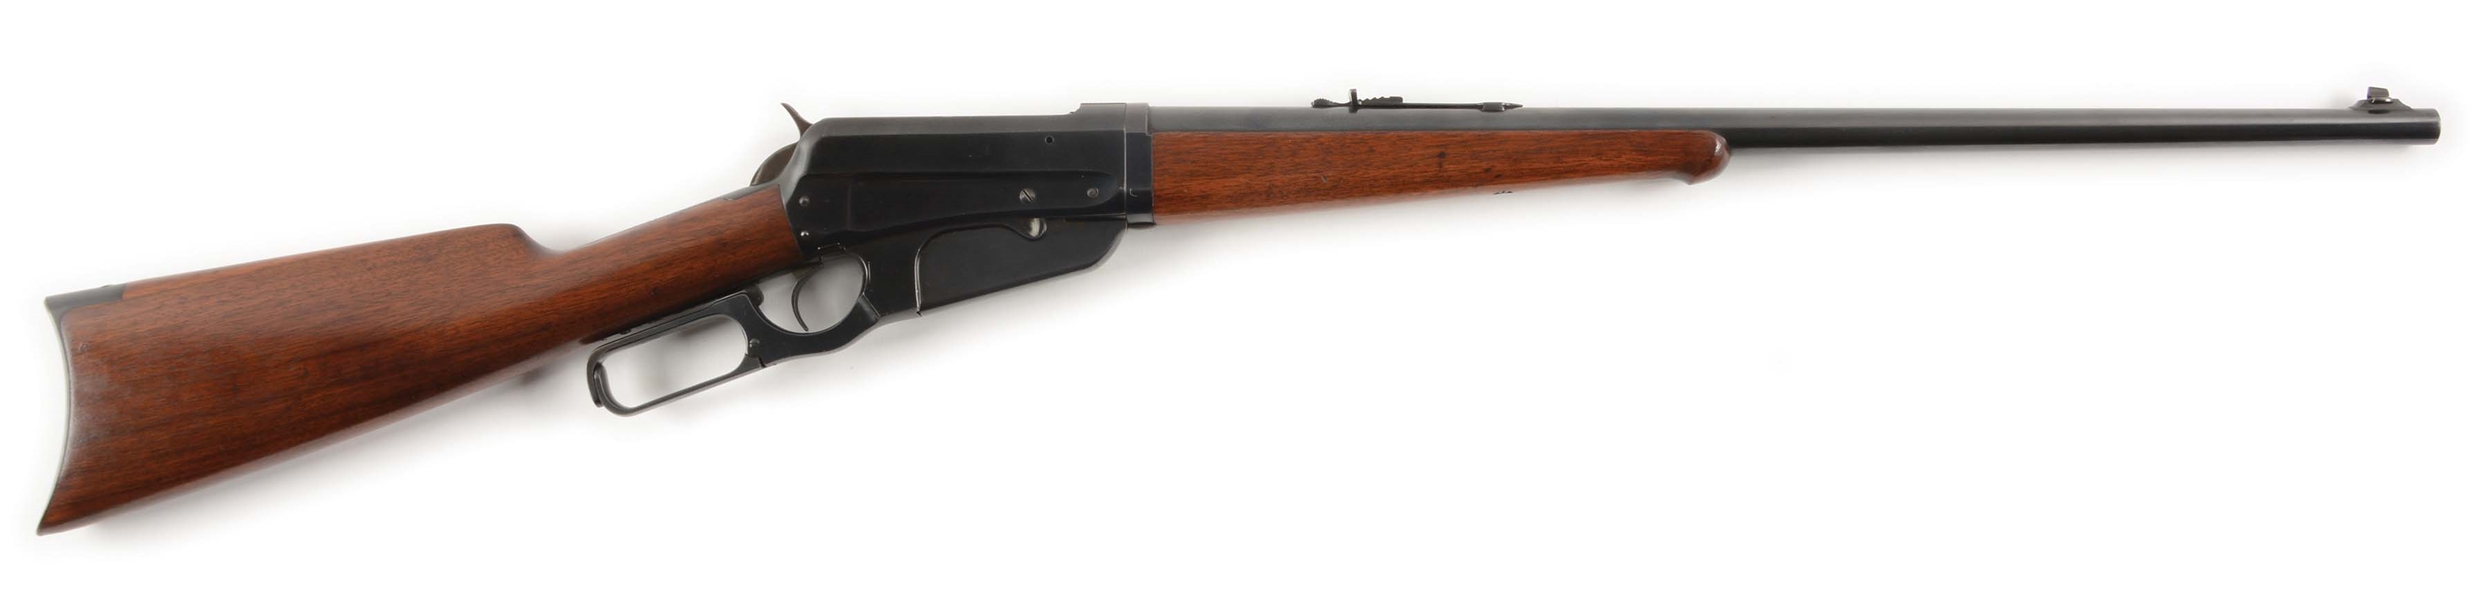 (C) NEAR NEW WINCHESTER MODEL 1895 .30-06 TAKEDOWN LEVER ACTION RIFLE (1915).